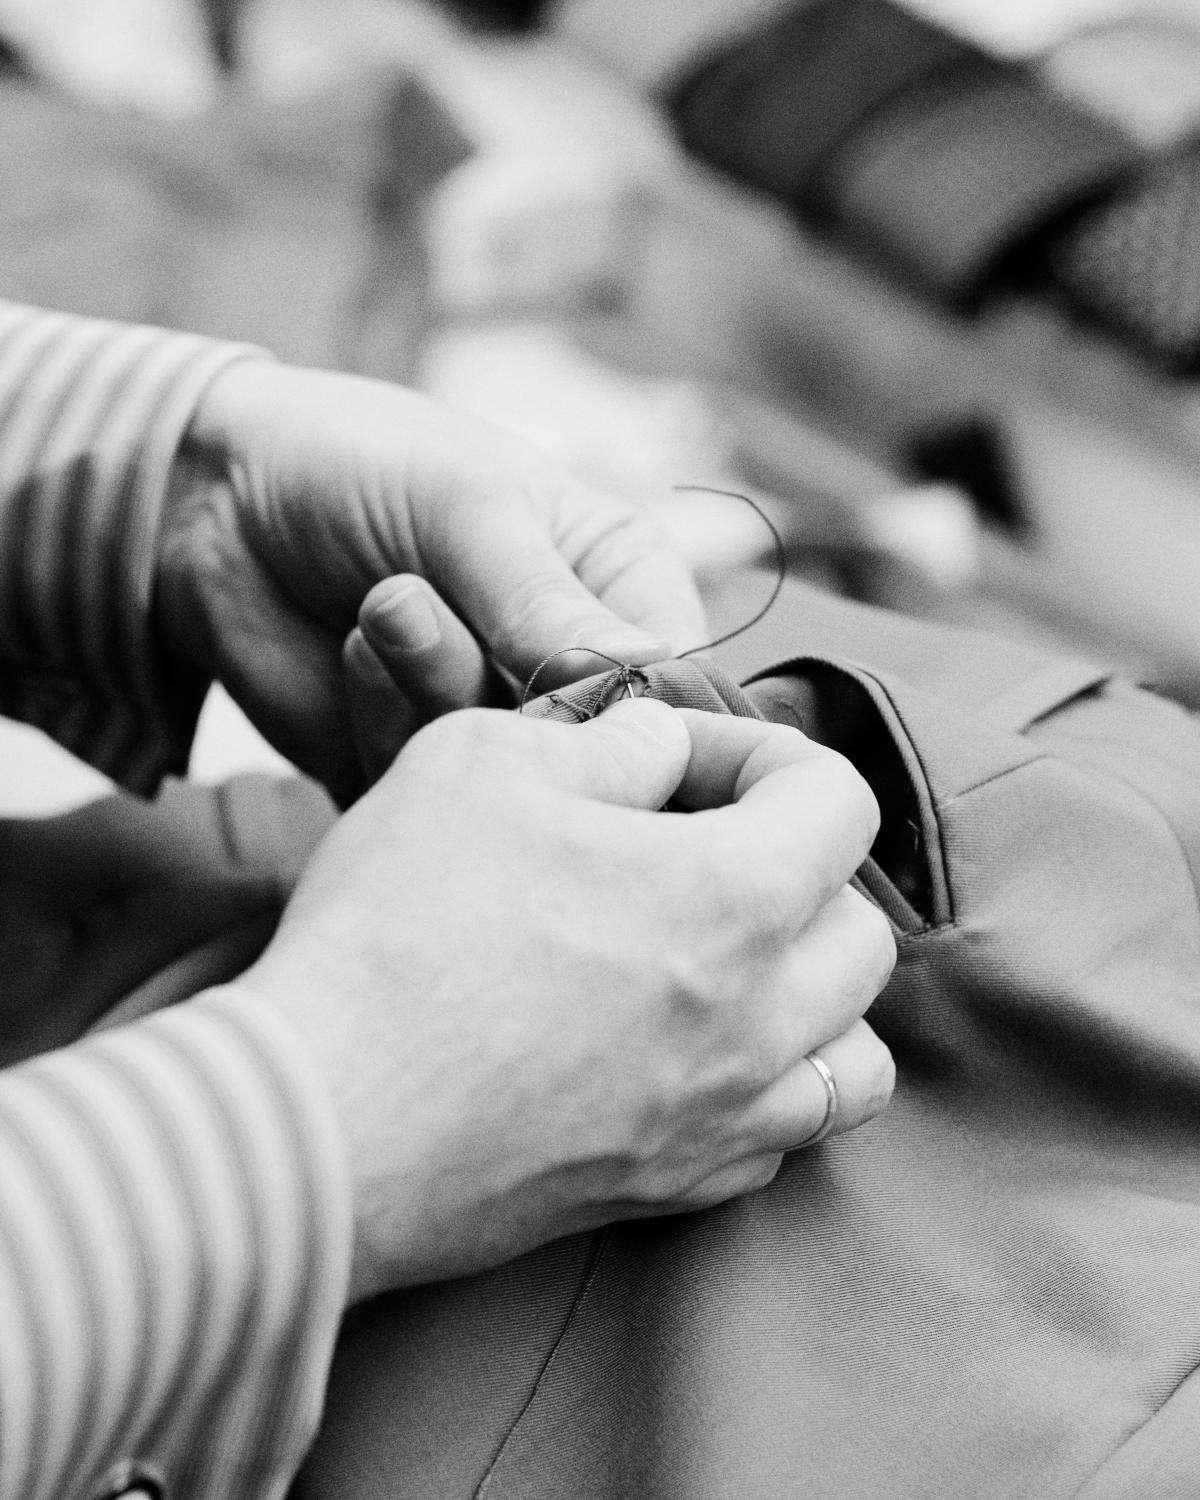 black and white photo of a pair of hands hand sewing stitches into a suit